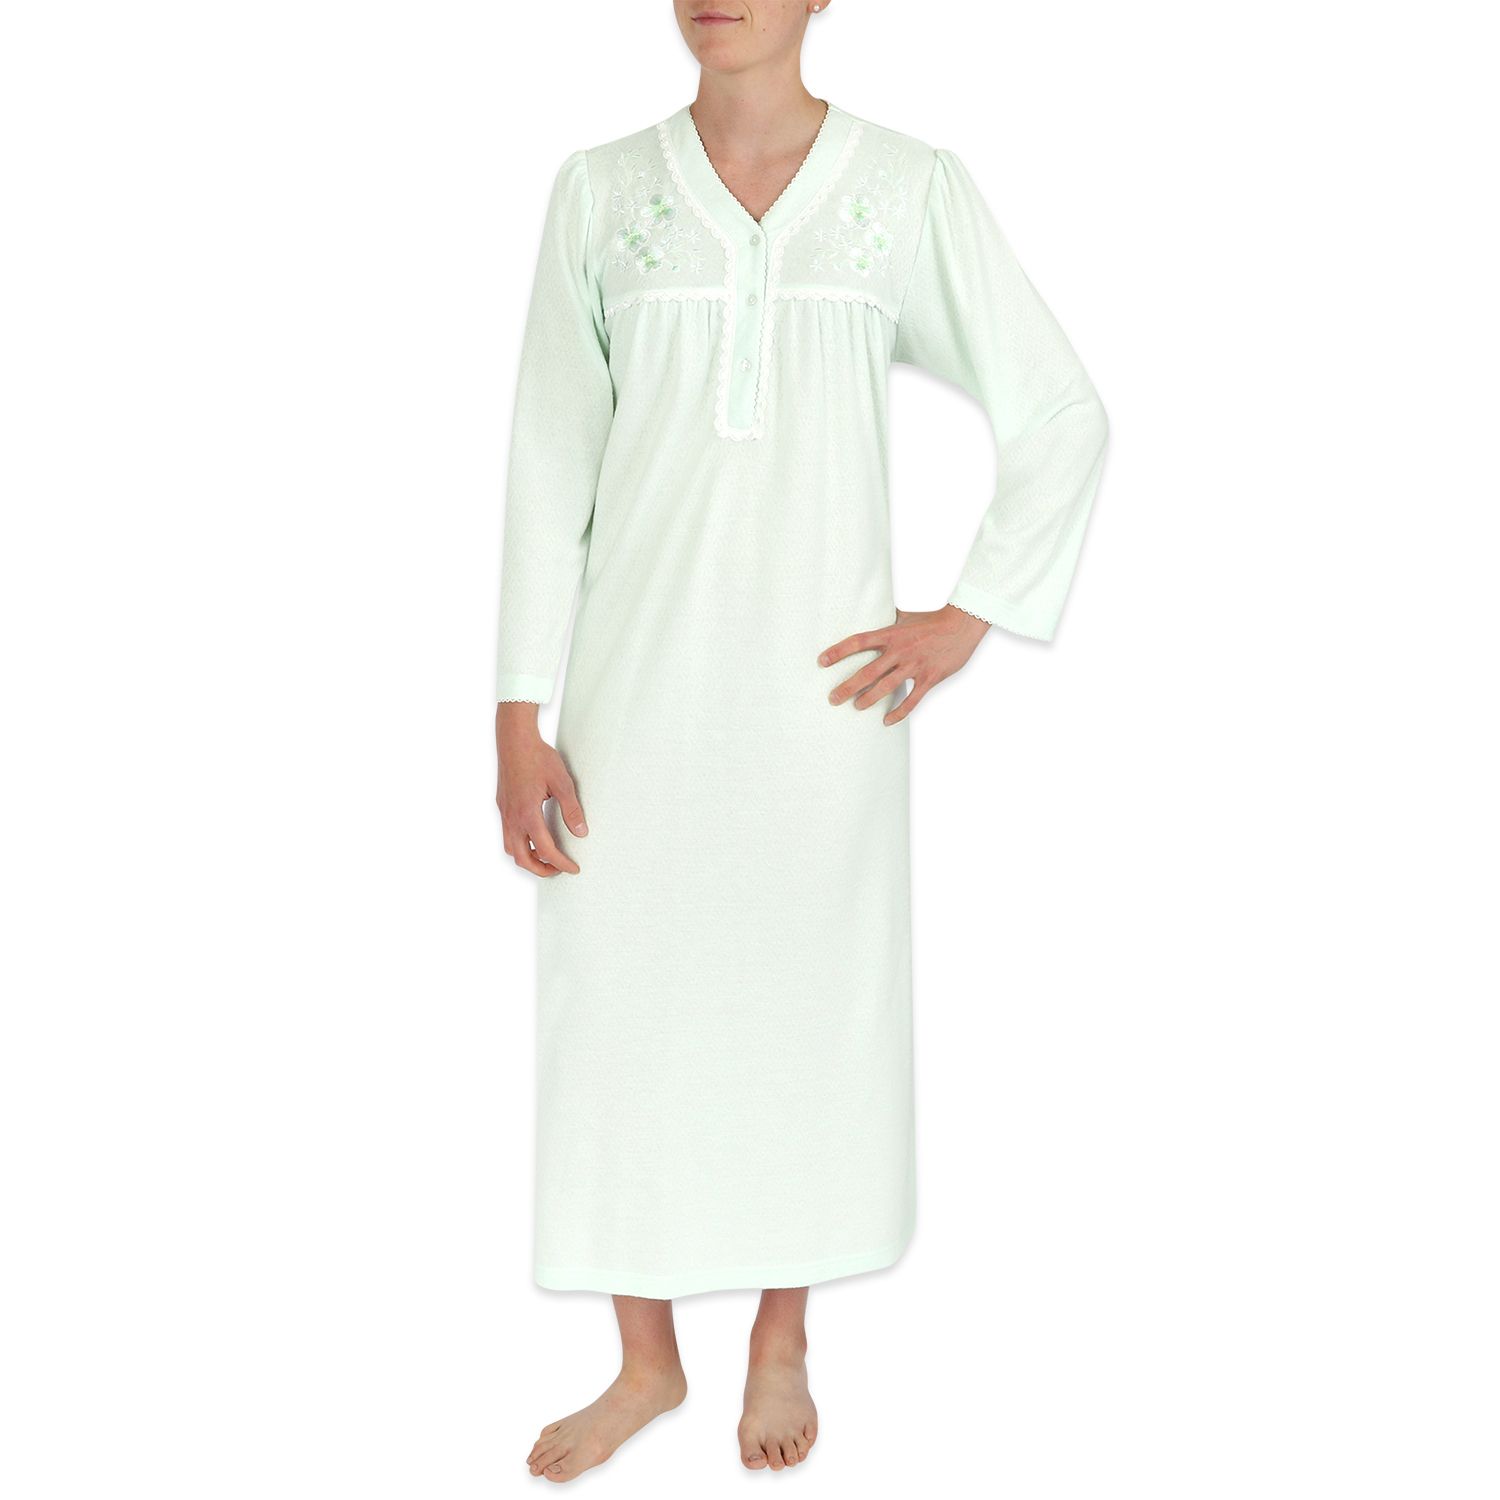 miss elaine long sleeve nightgowns